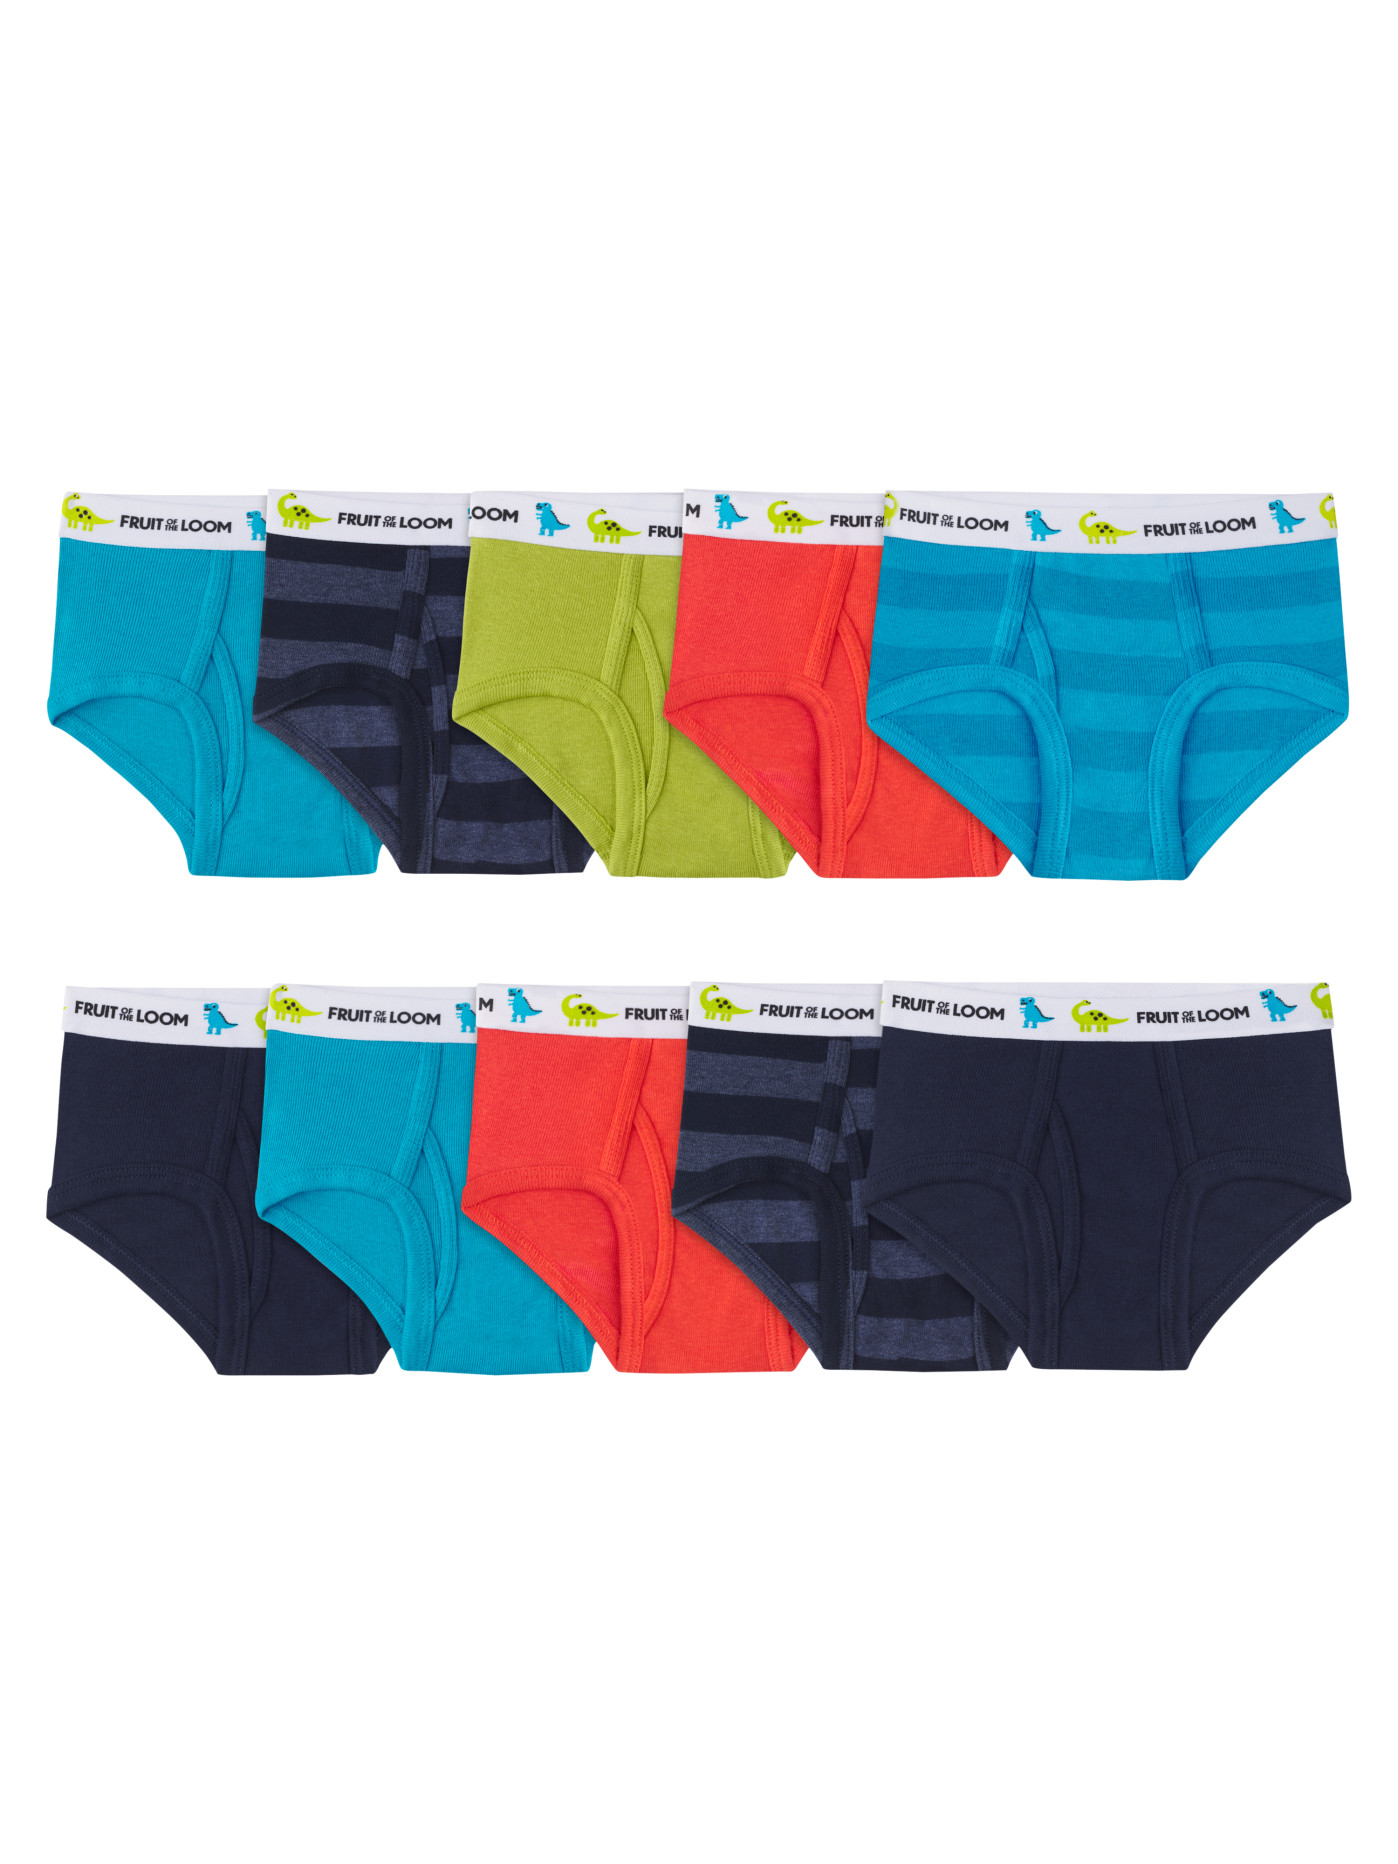 Fruit of the Loom Toddler Girl Brief Underwear, 10 Pack, Sizes 2T-5T